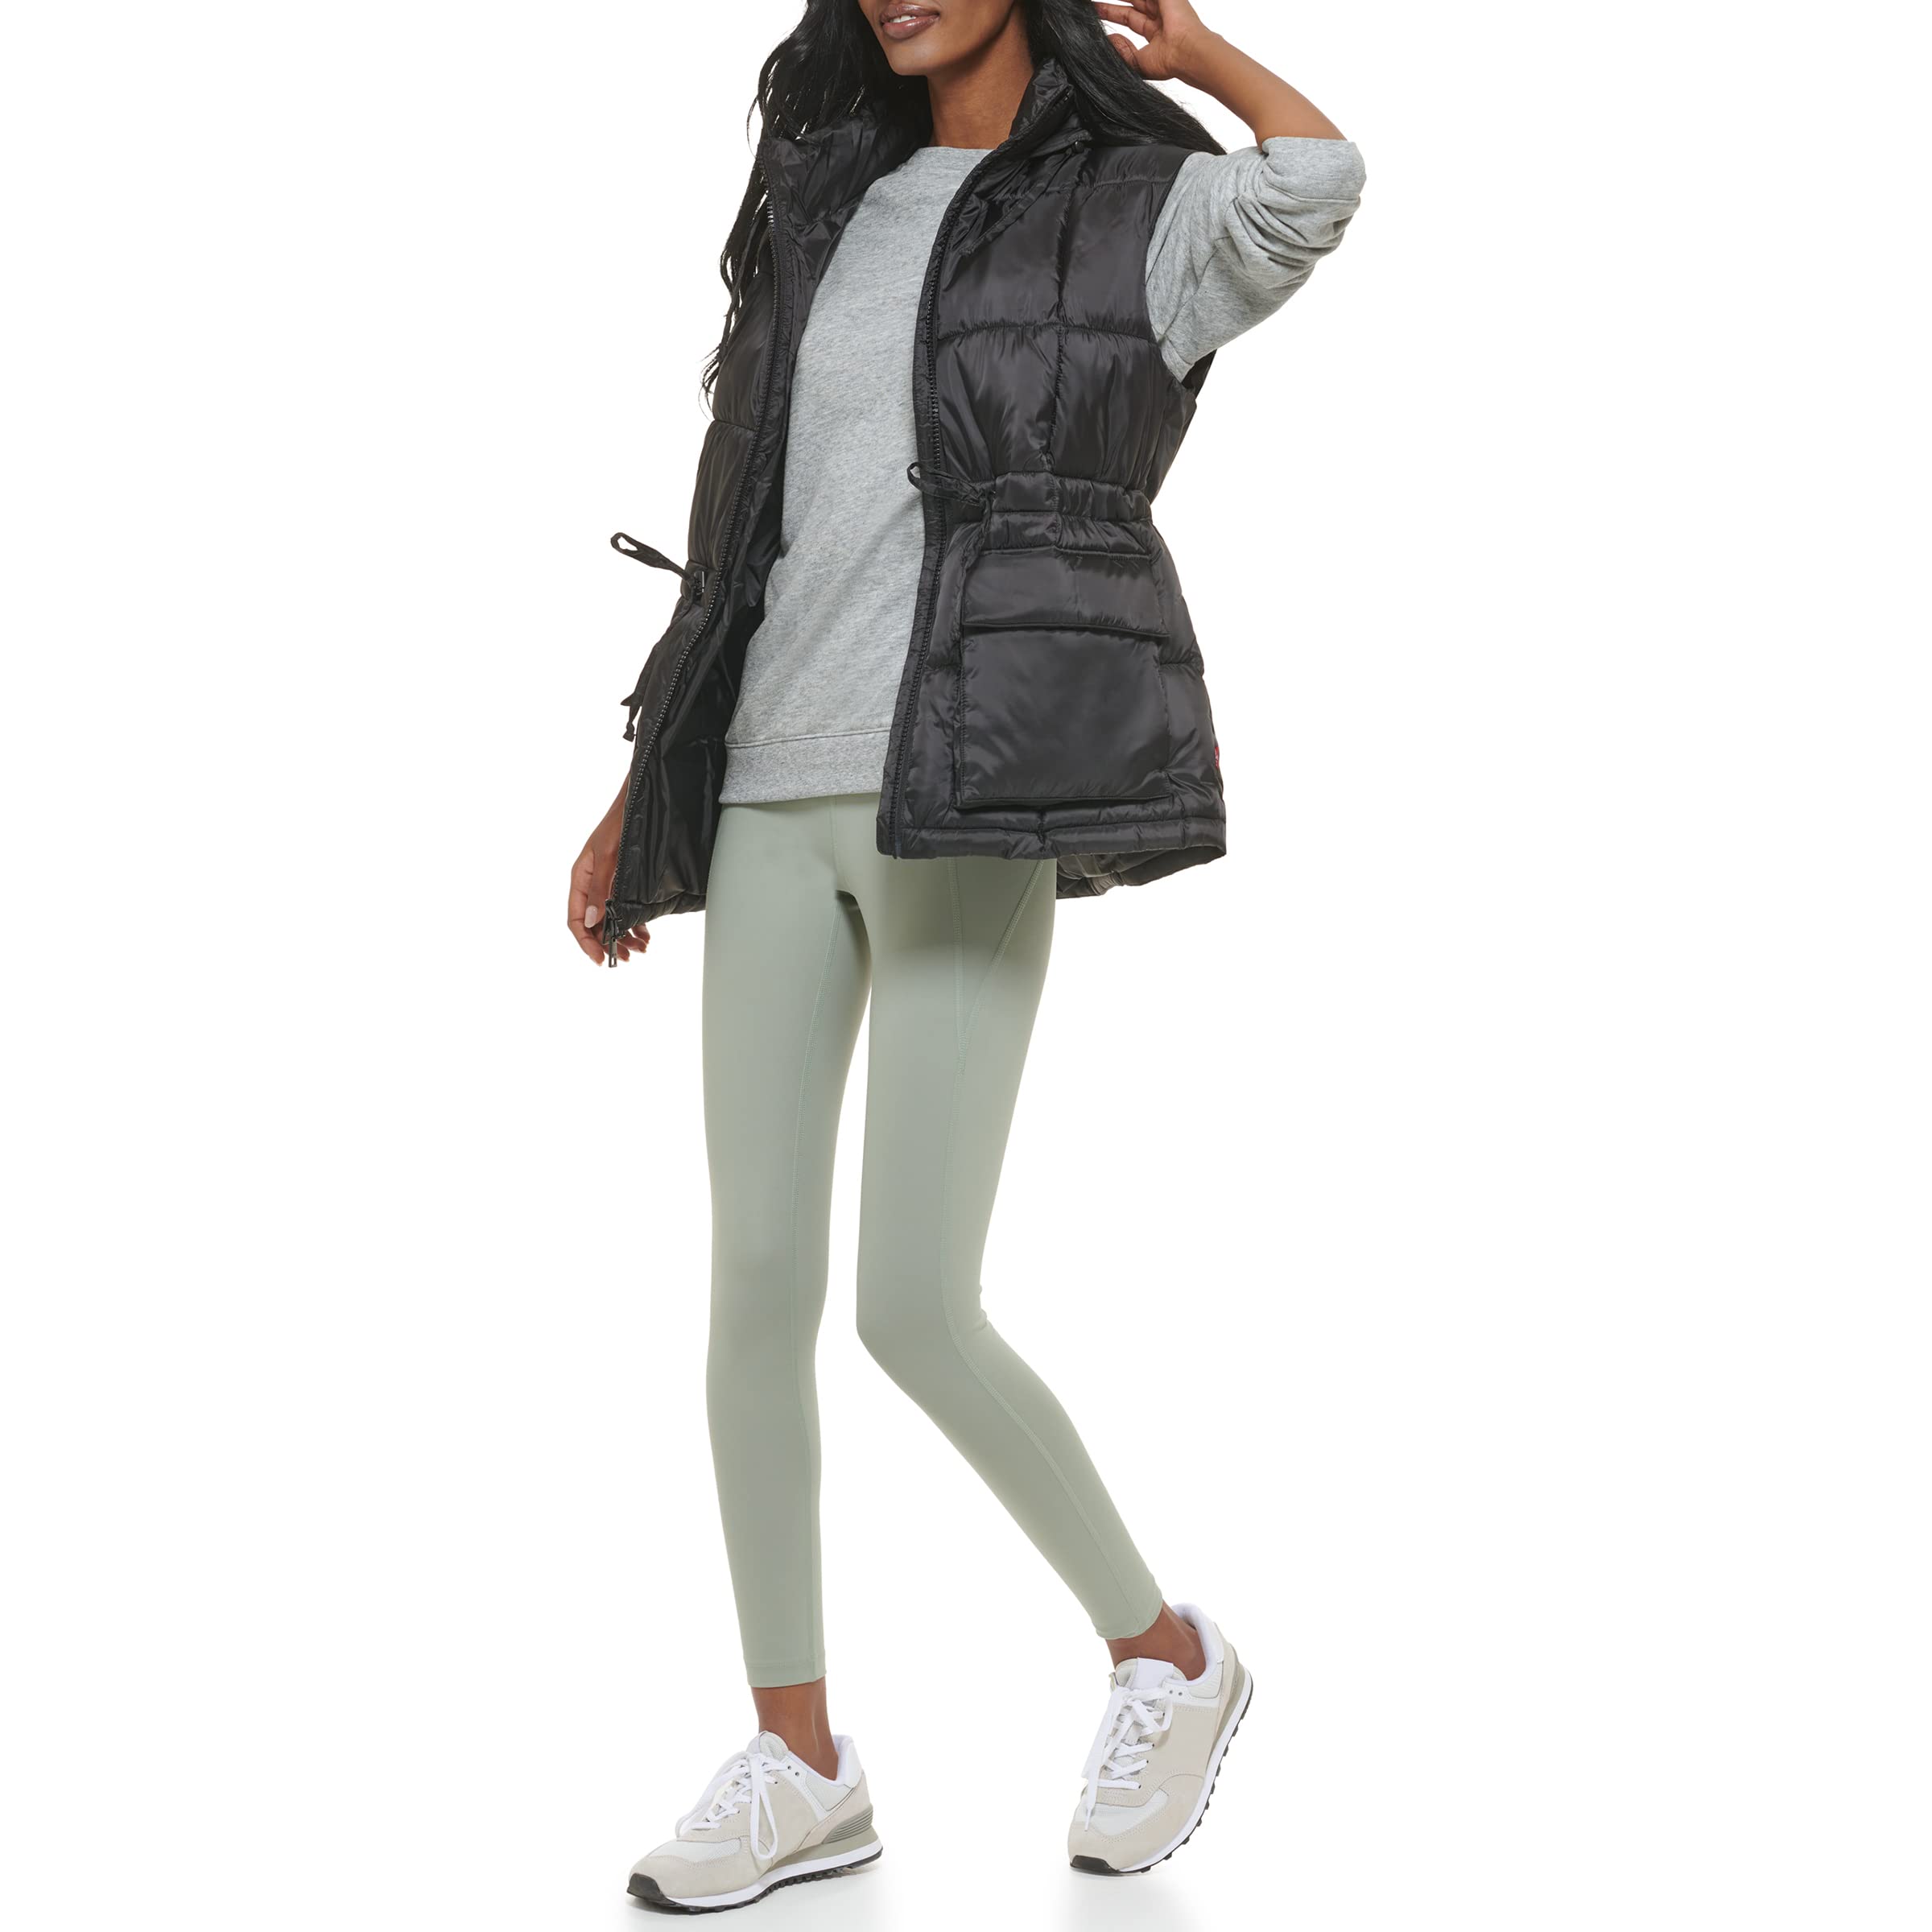 Levi's Women's Quilted Megan Hooded Puffer Jacket